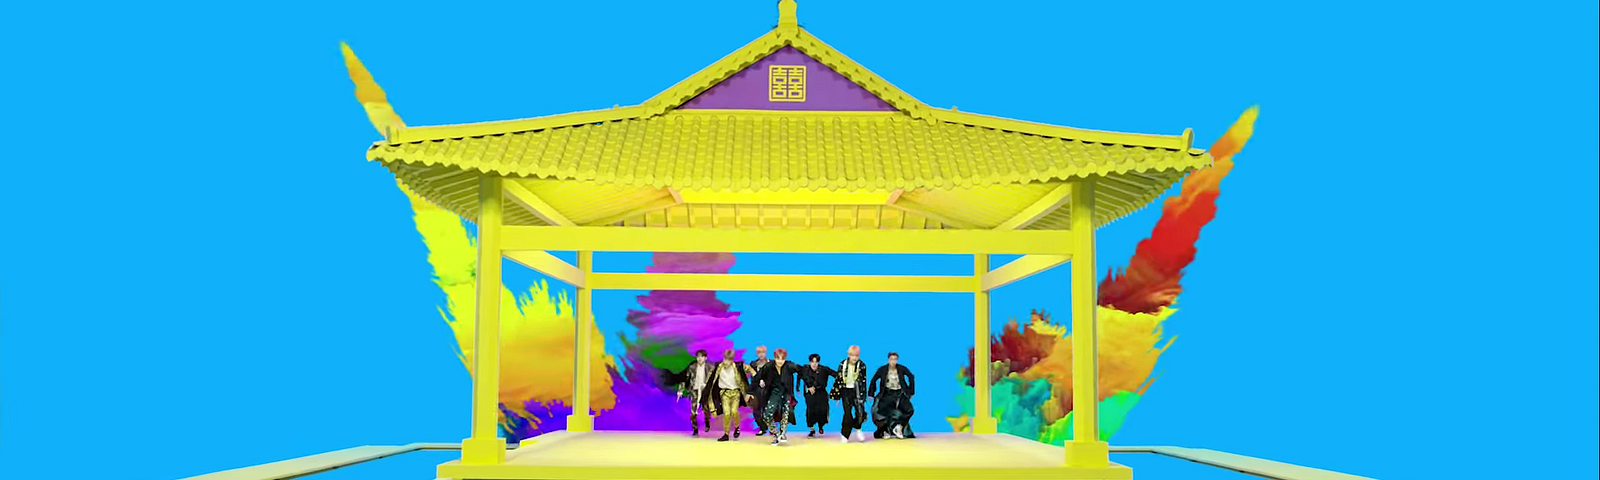 Photo from https://seoulbeats.com/2018/08/bts-fuse-traditional-with-innovative-in-idol/